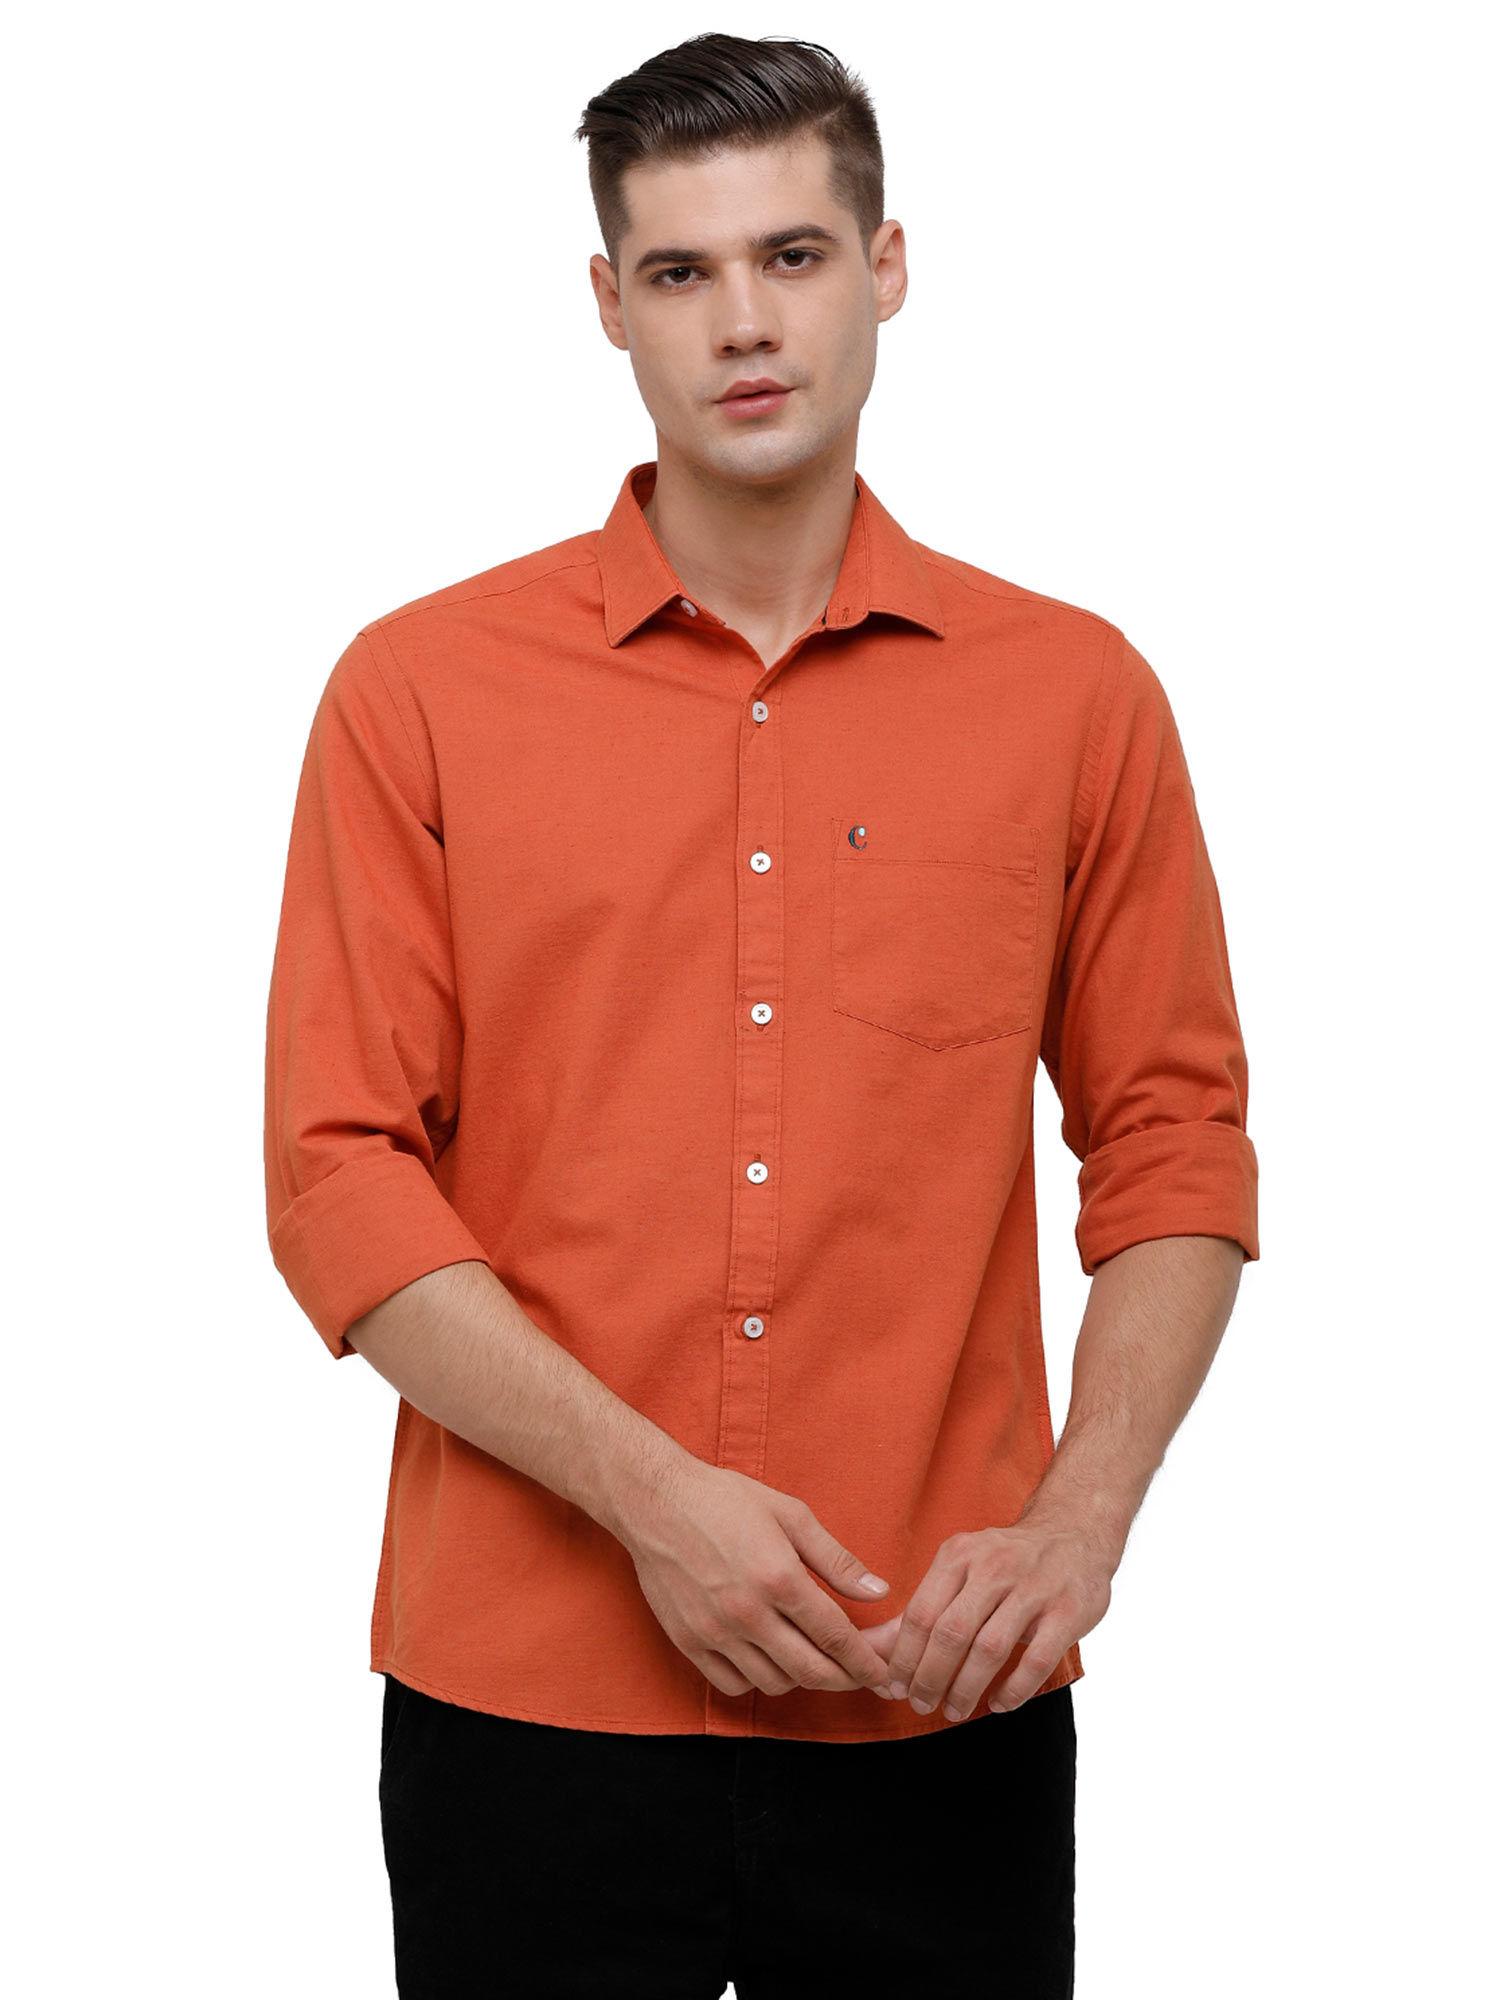 men's-cotton-linen-red-solid-slim-fit-full-sleeve-casual-shirt